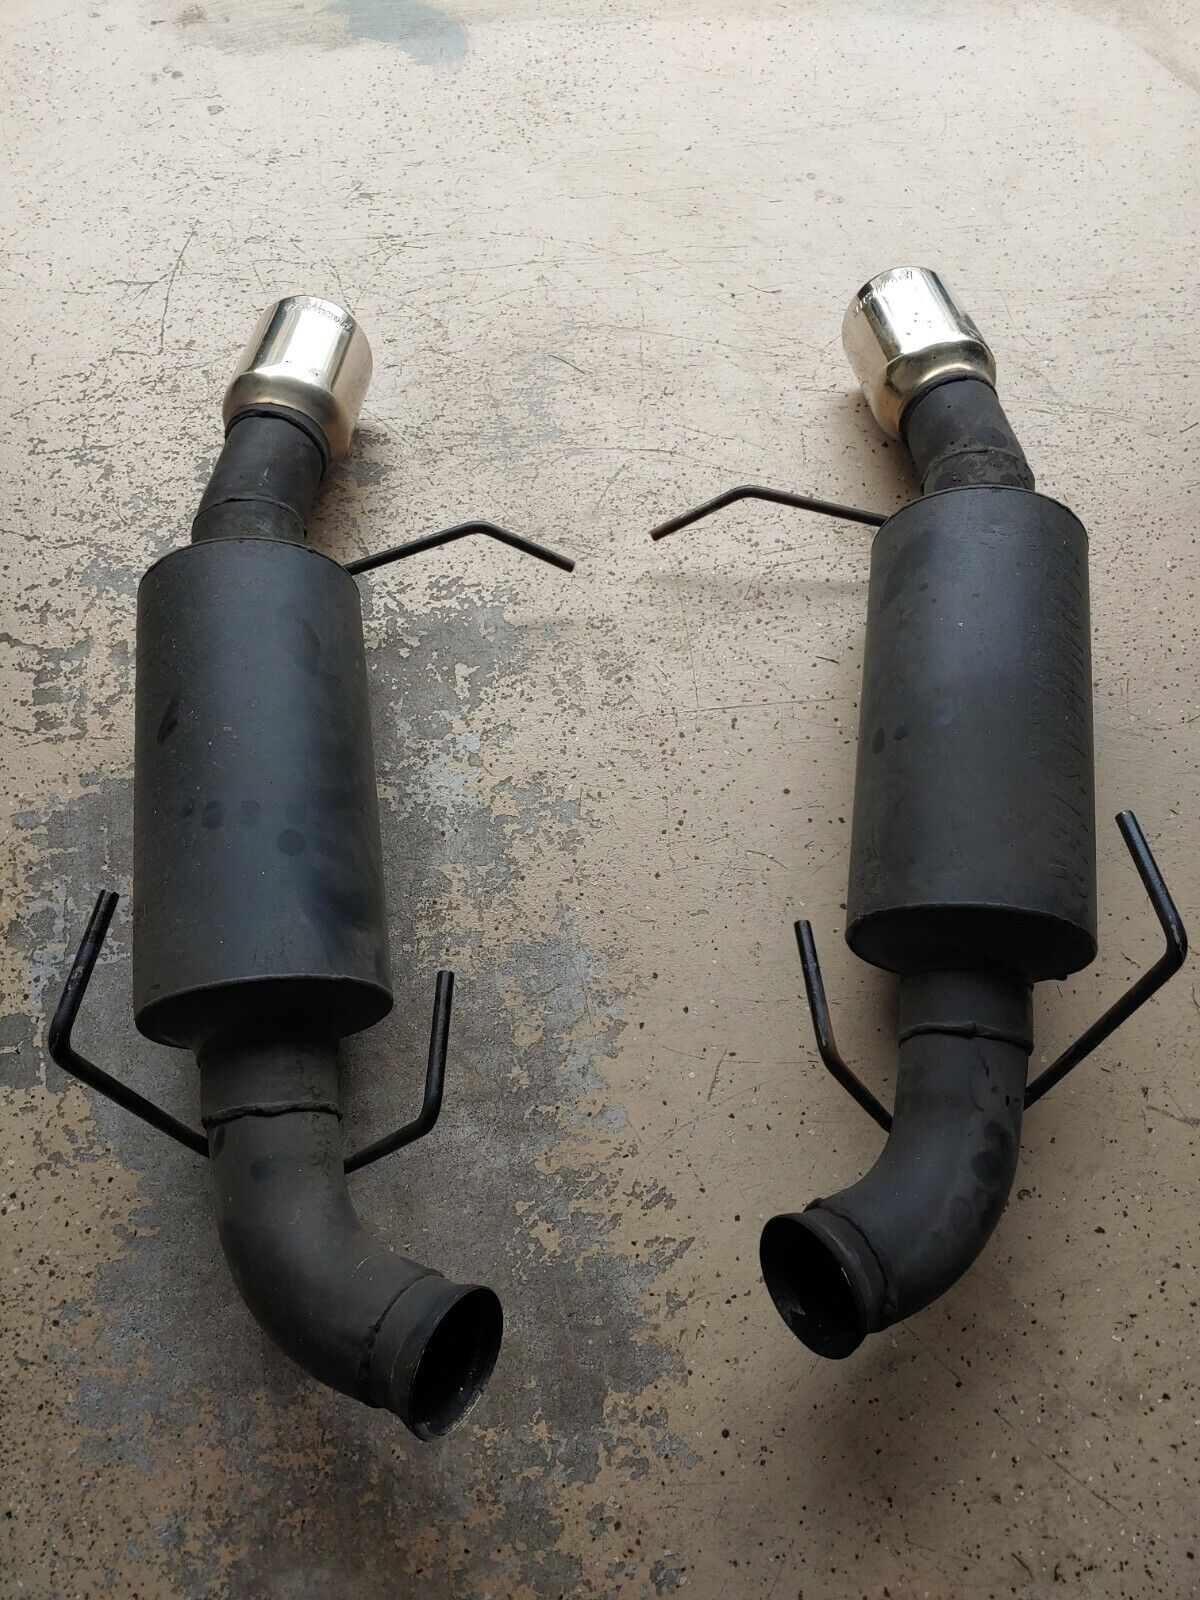 2011-12 Ford Mustang Shelby GT-500 Exhaust - Flowmaster American Thunder